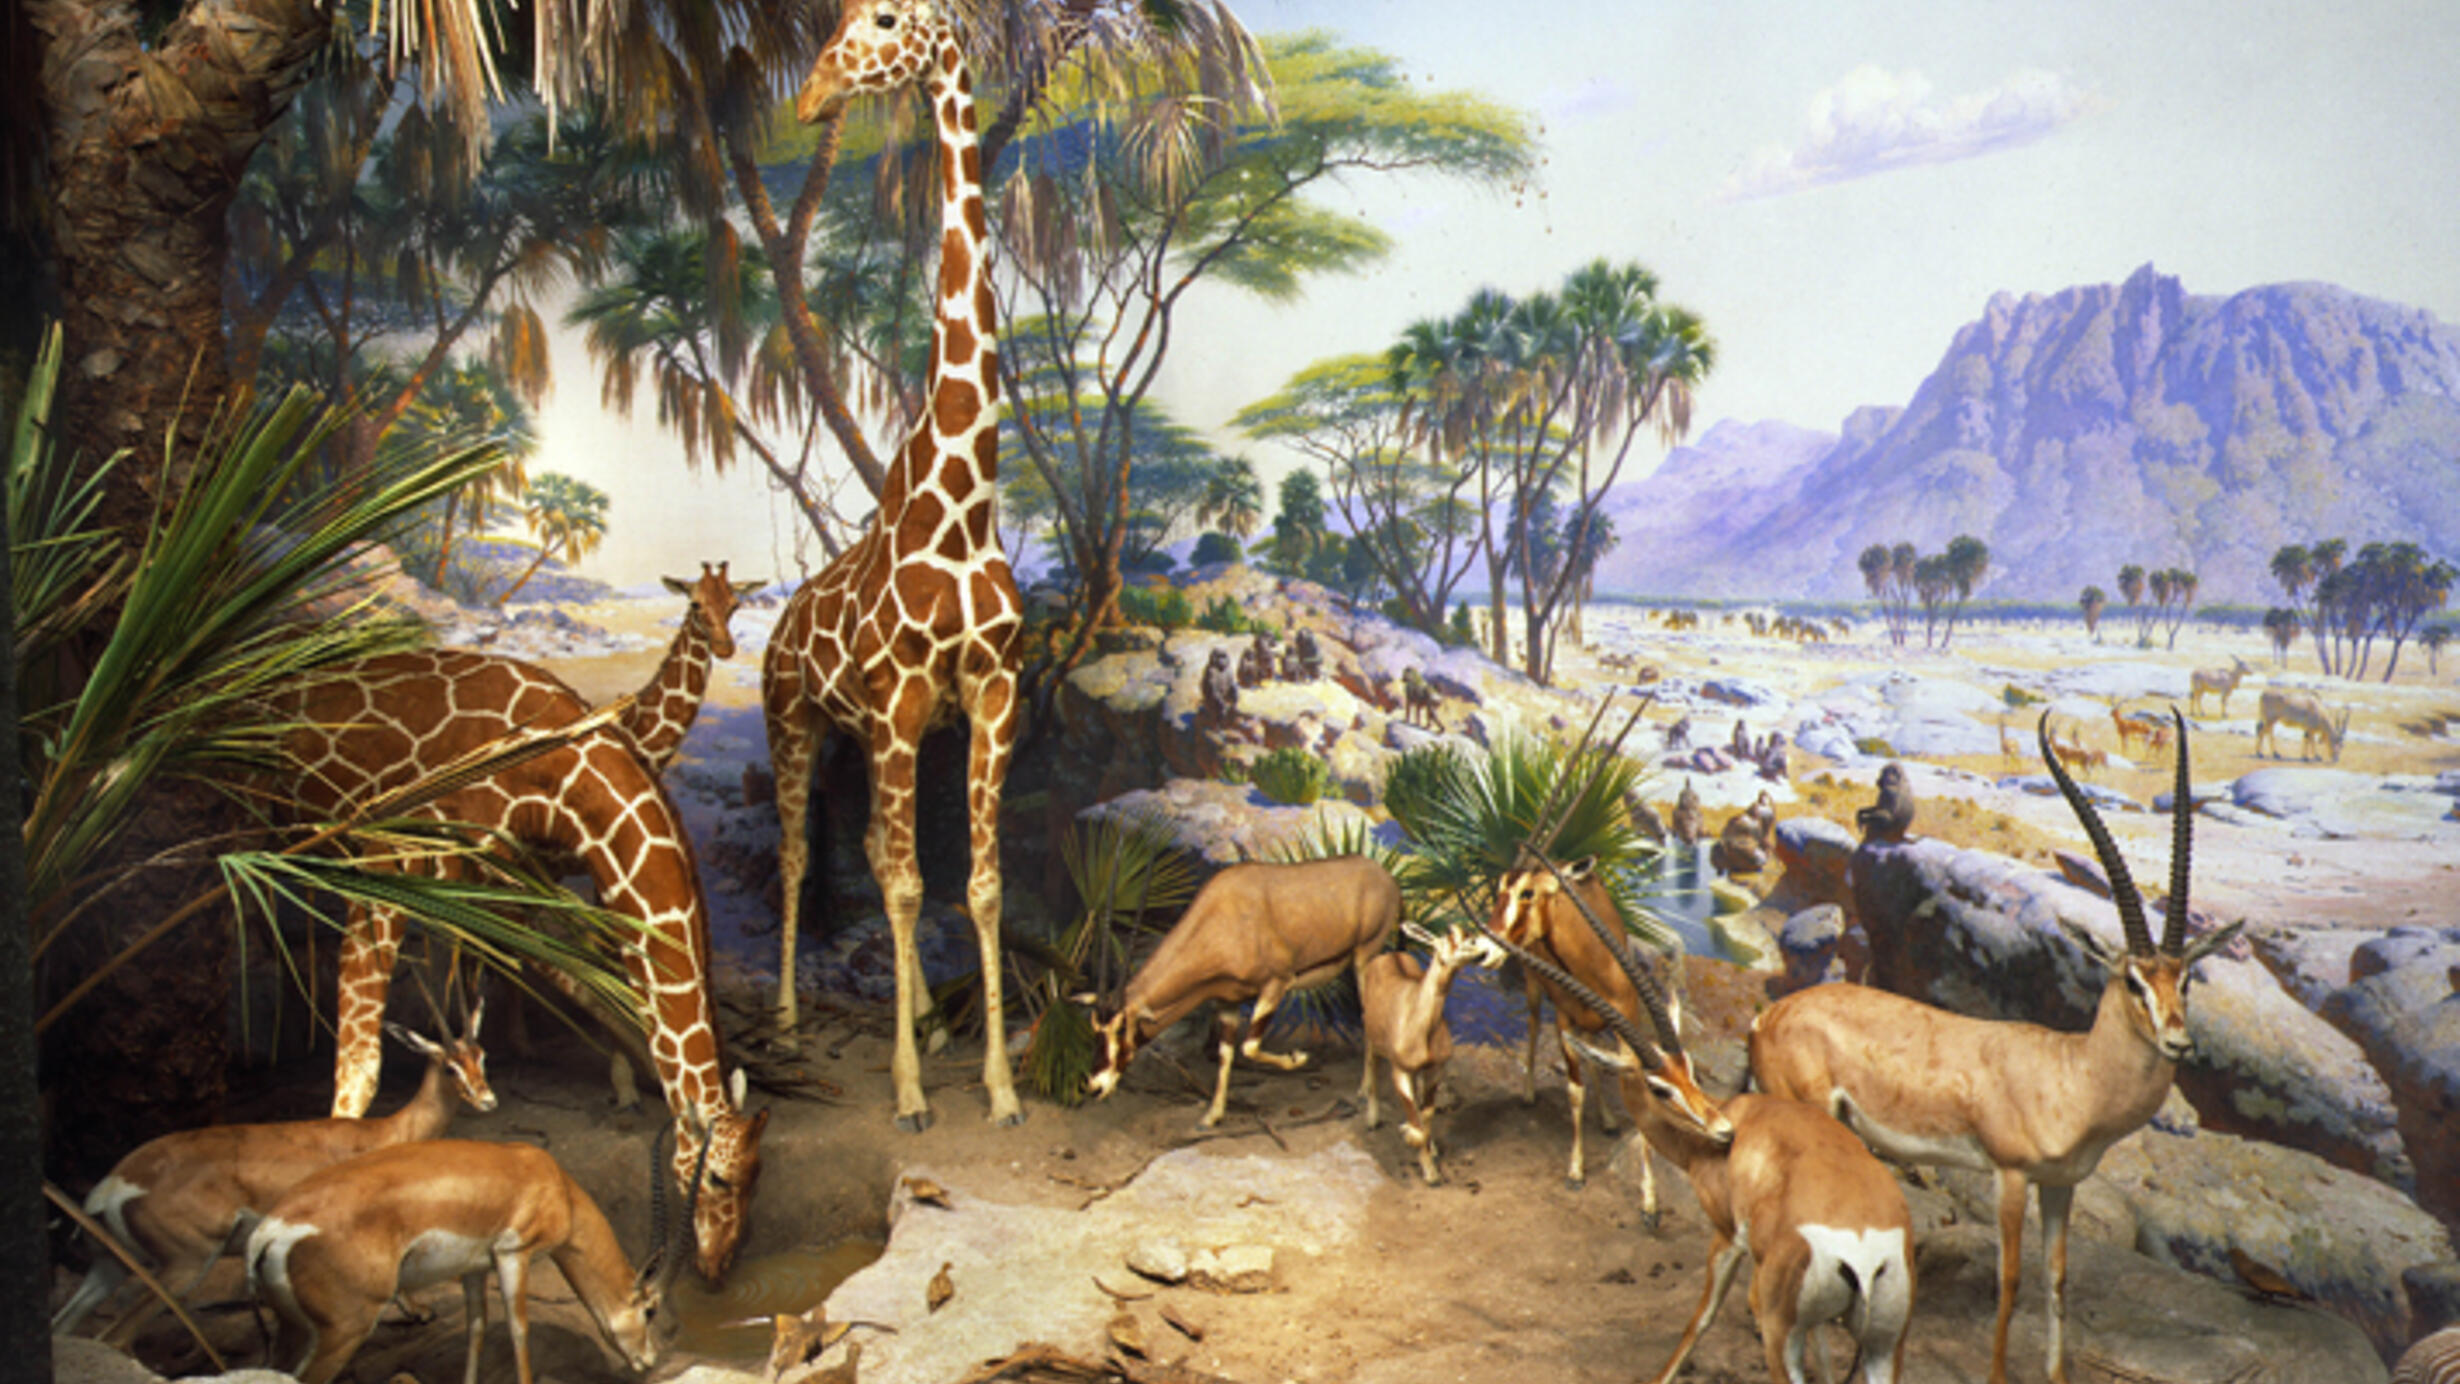 The Museum's Watering Hole diorama with giraffes and gazelles in the foreground, and a painting of a dry flat plain with other animals and a mountain rising in the distant background.